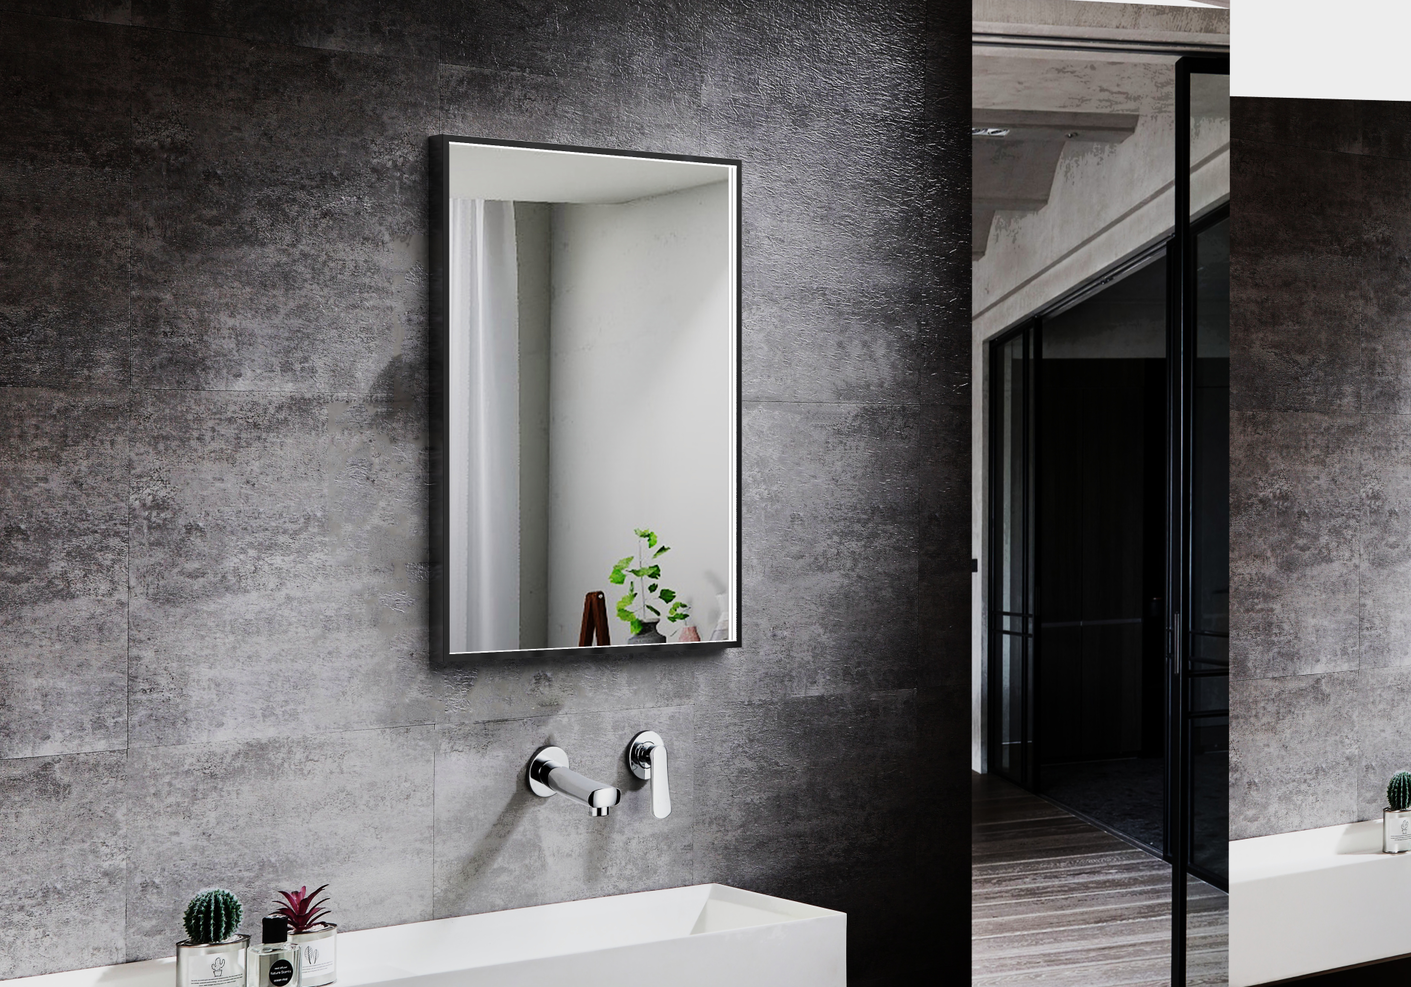 9 Top-Rated LED Bathroom Mirrors